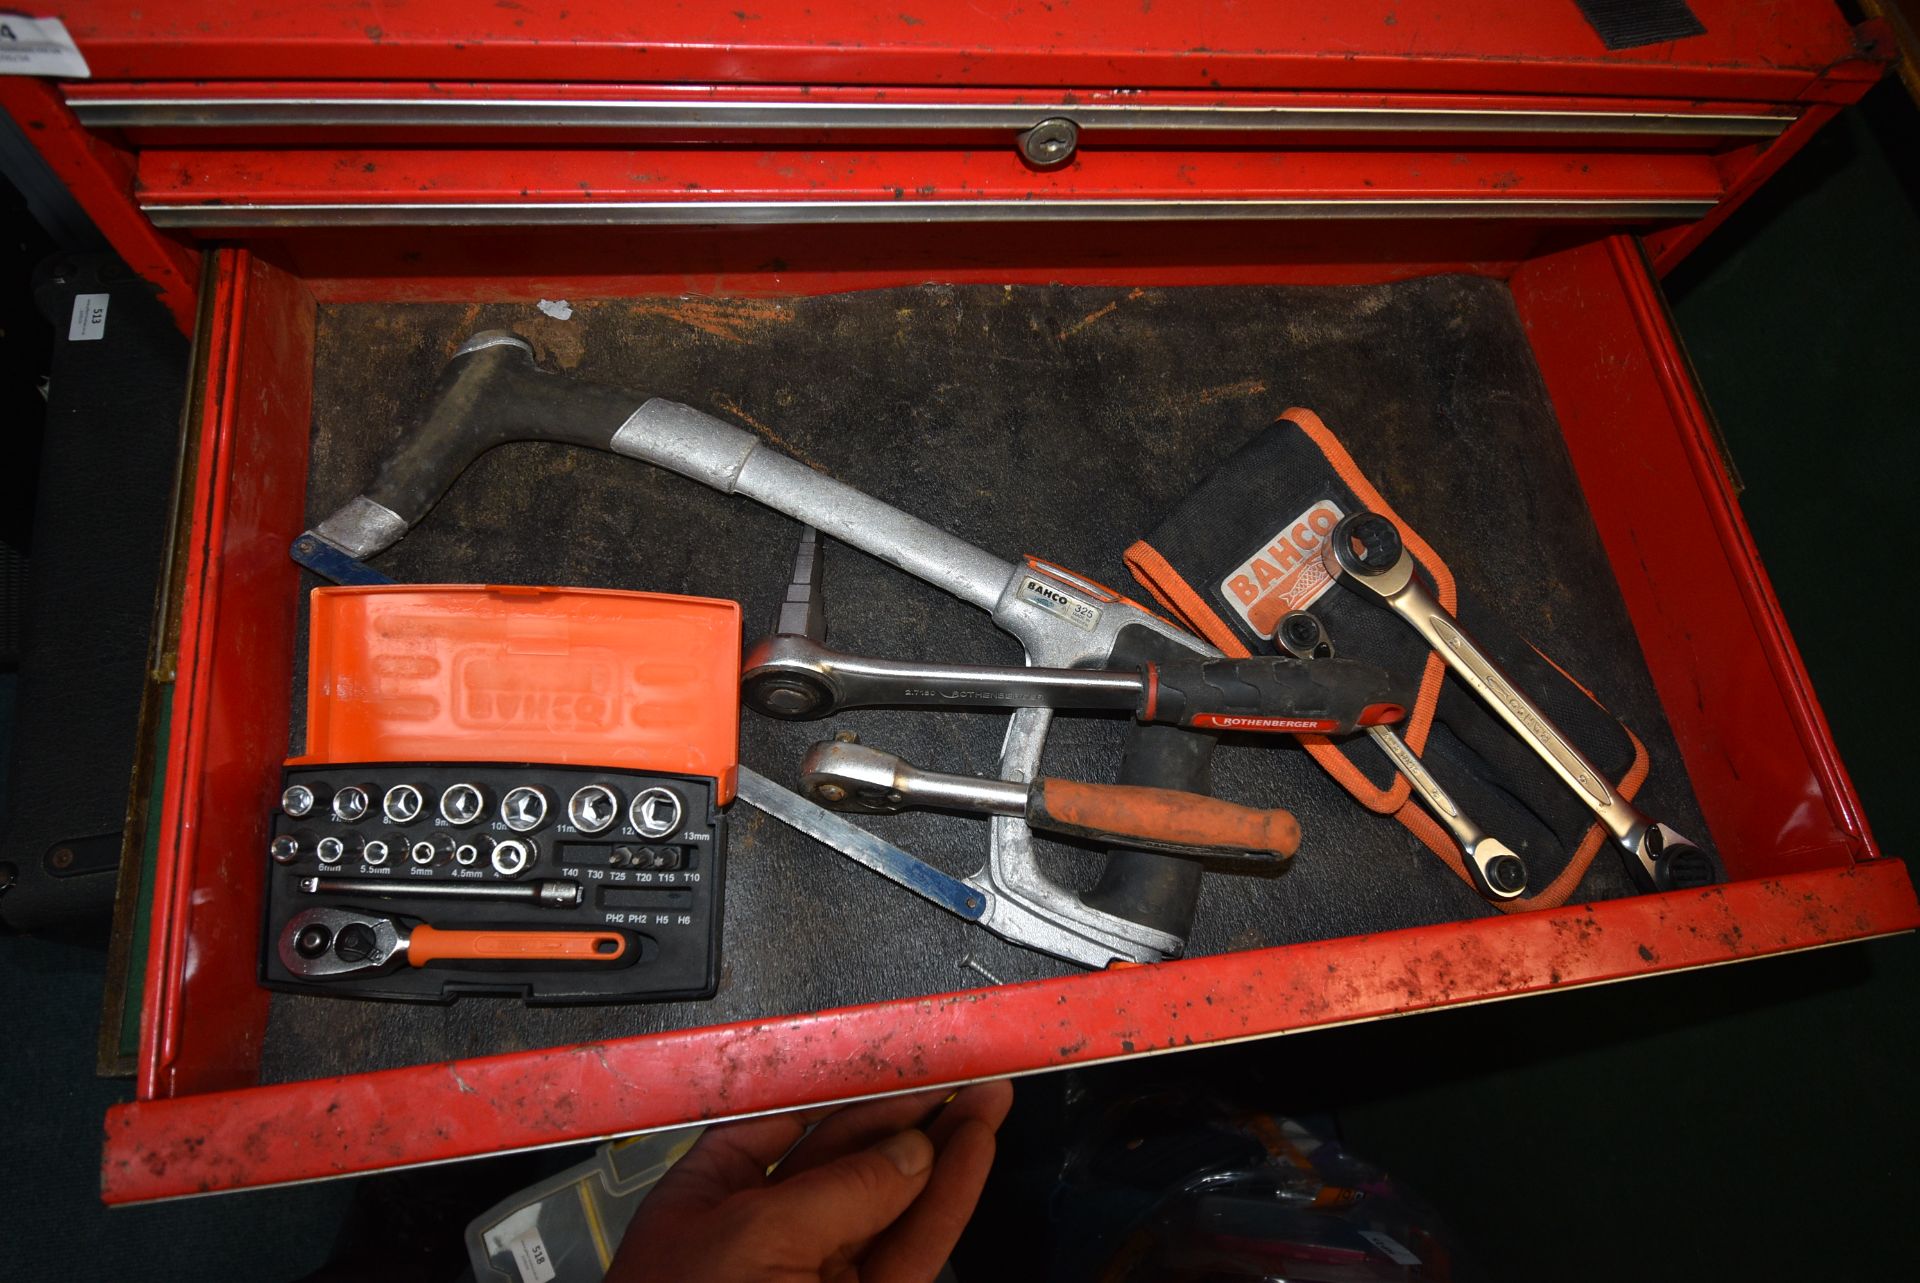 Snap On Three Drawer Tool Chest with Carry Handles 66x21x37cm and Contents of Barko and Other Tools - Image 4 of 4